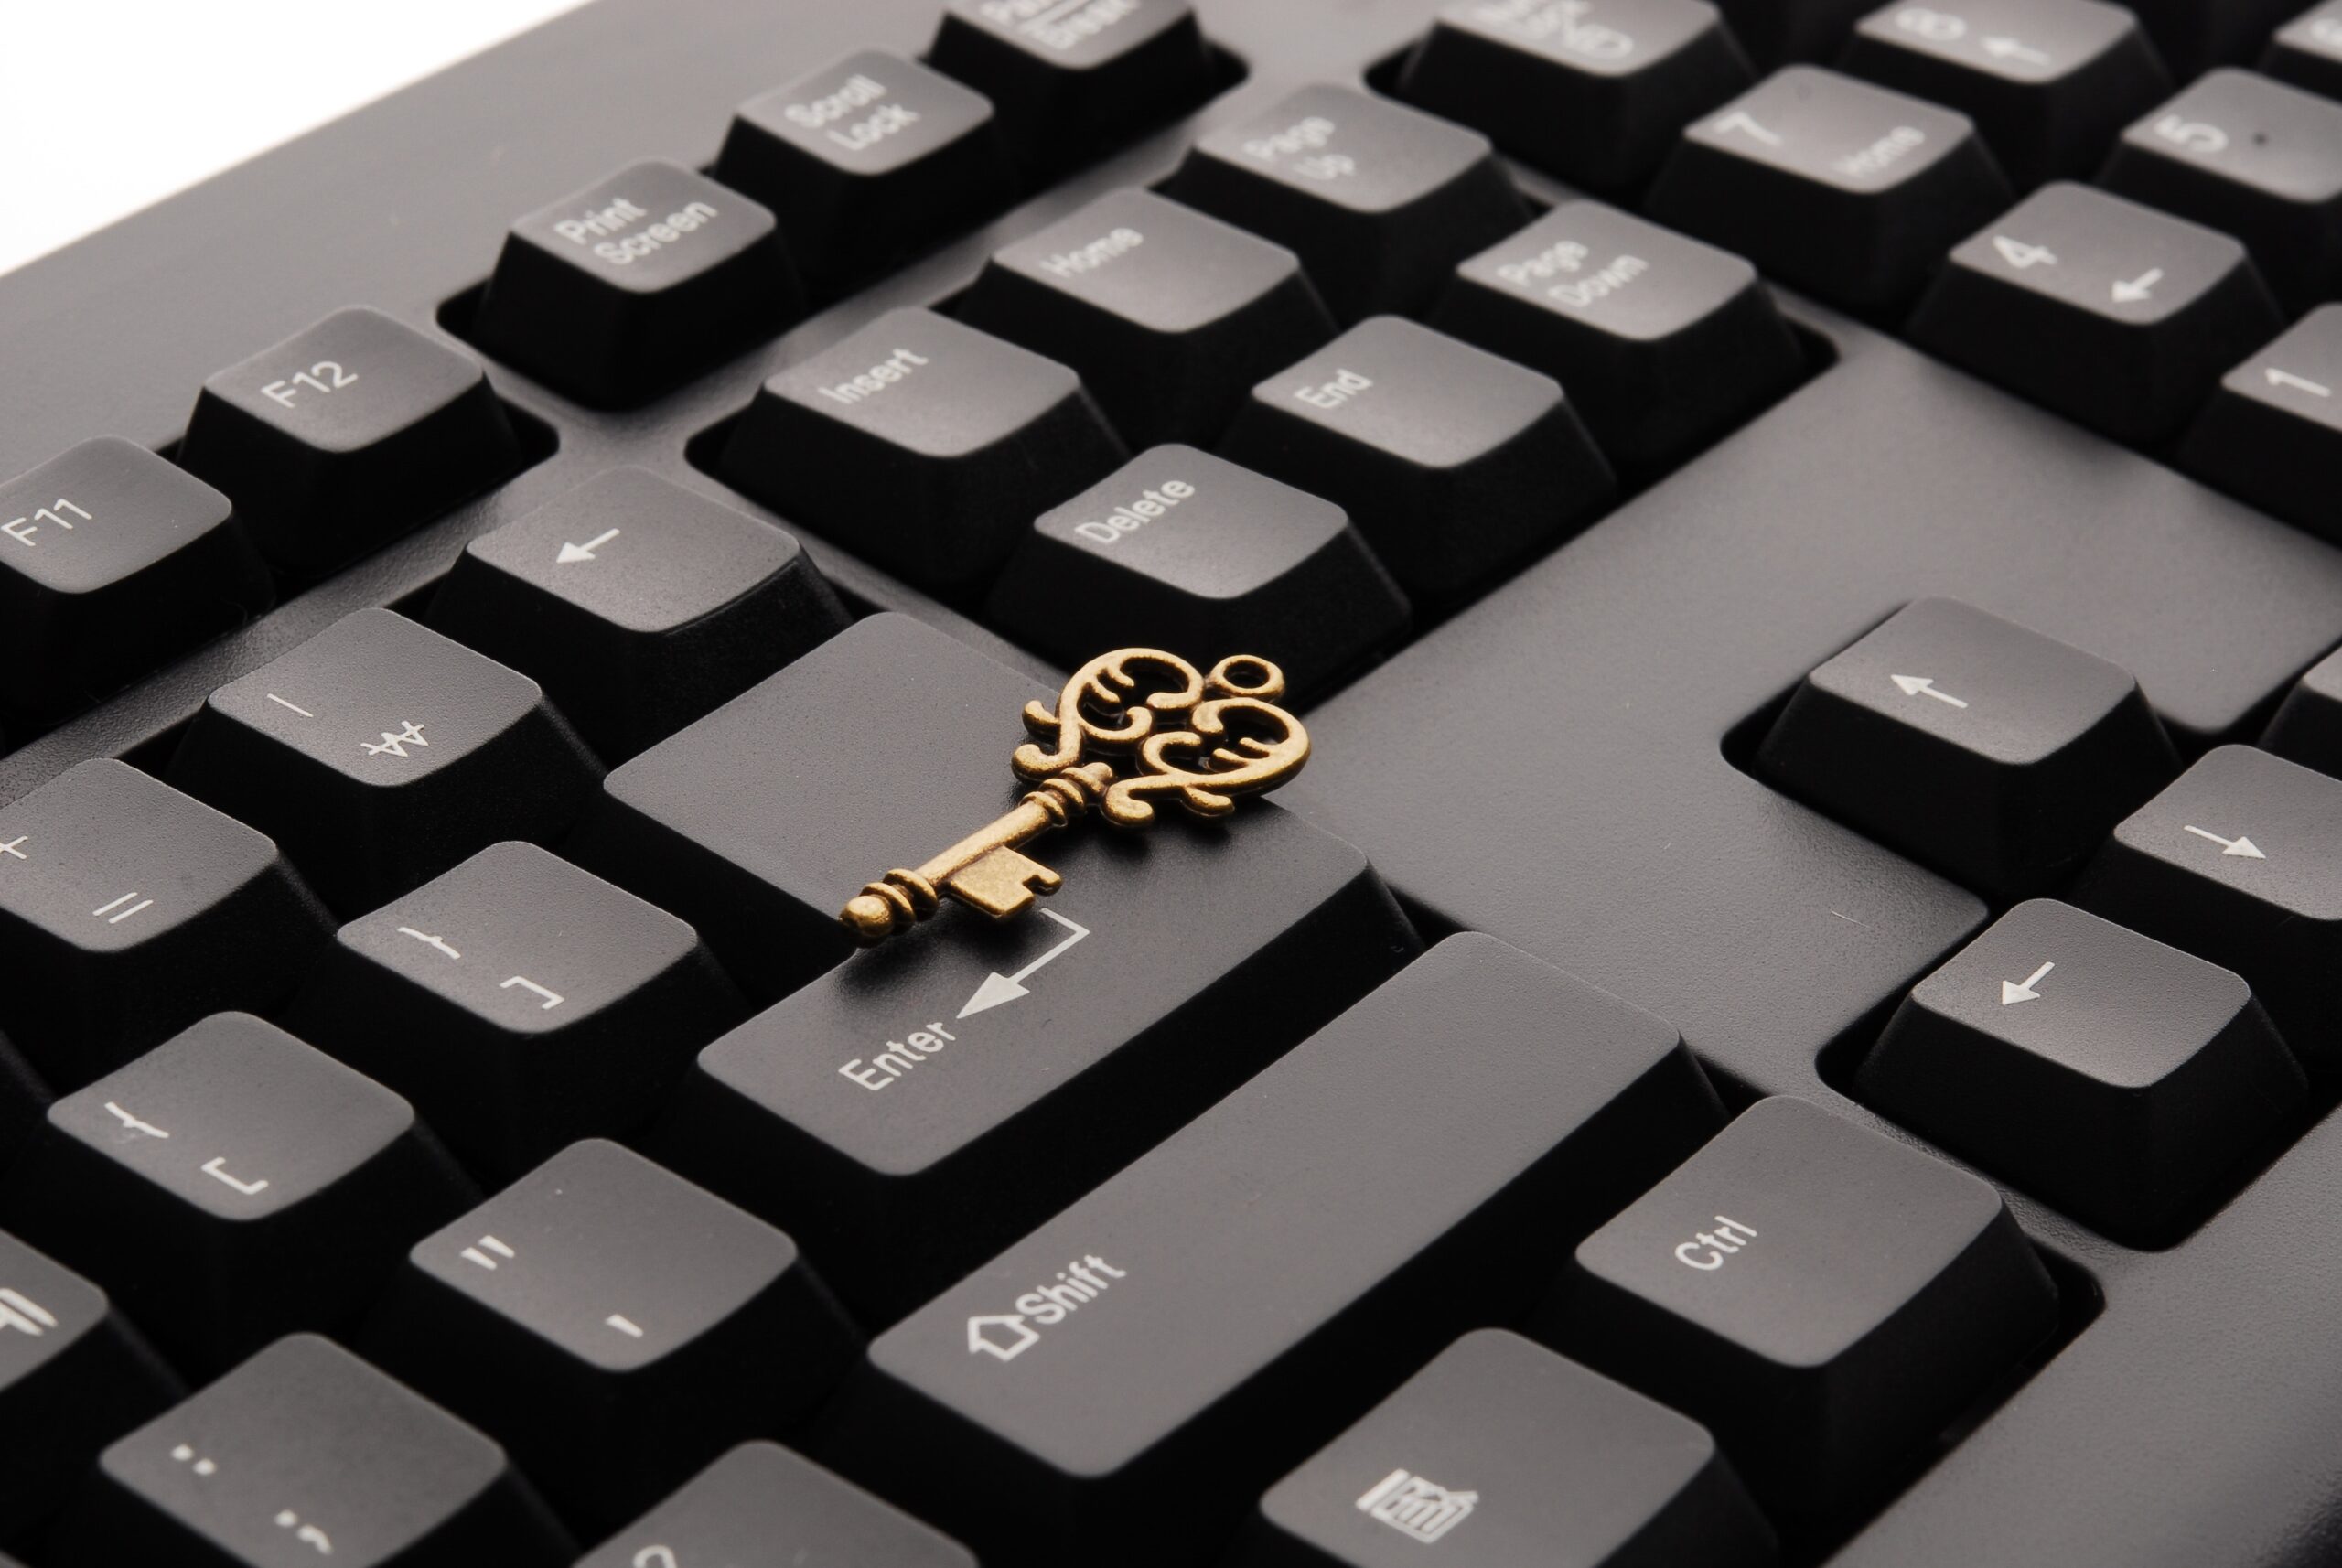 Close Up image of keyboard with a golden key on it